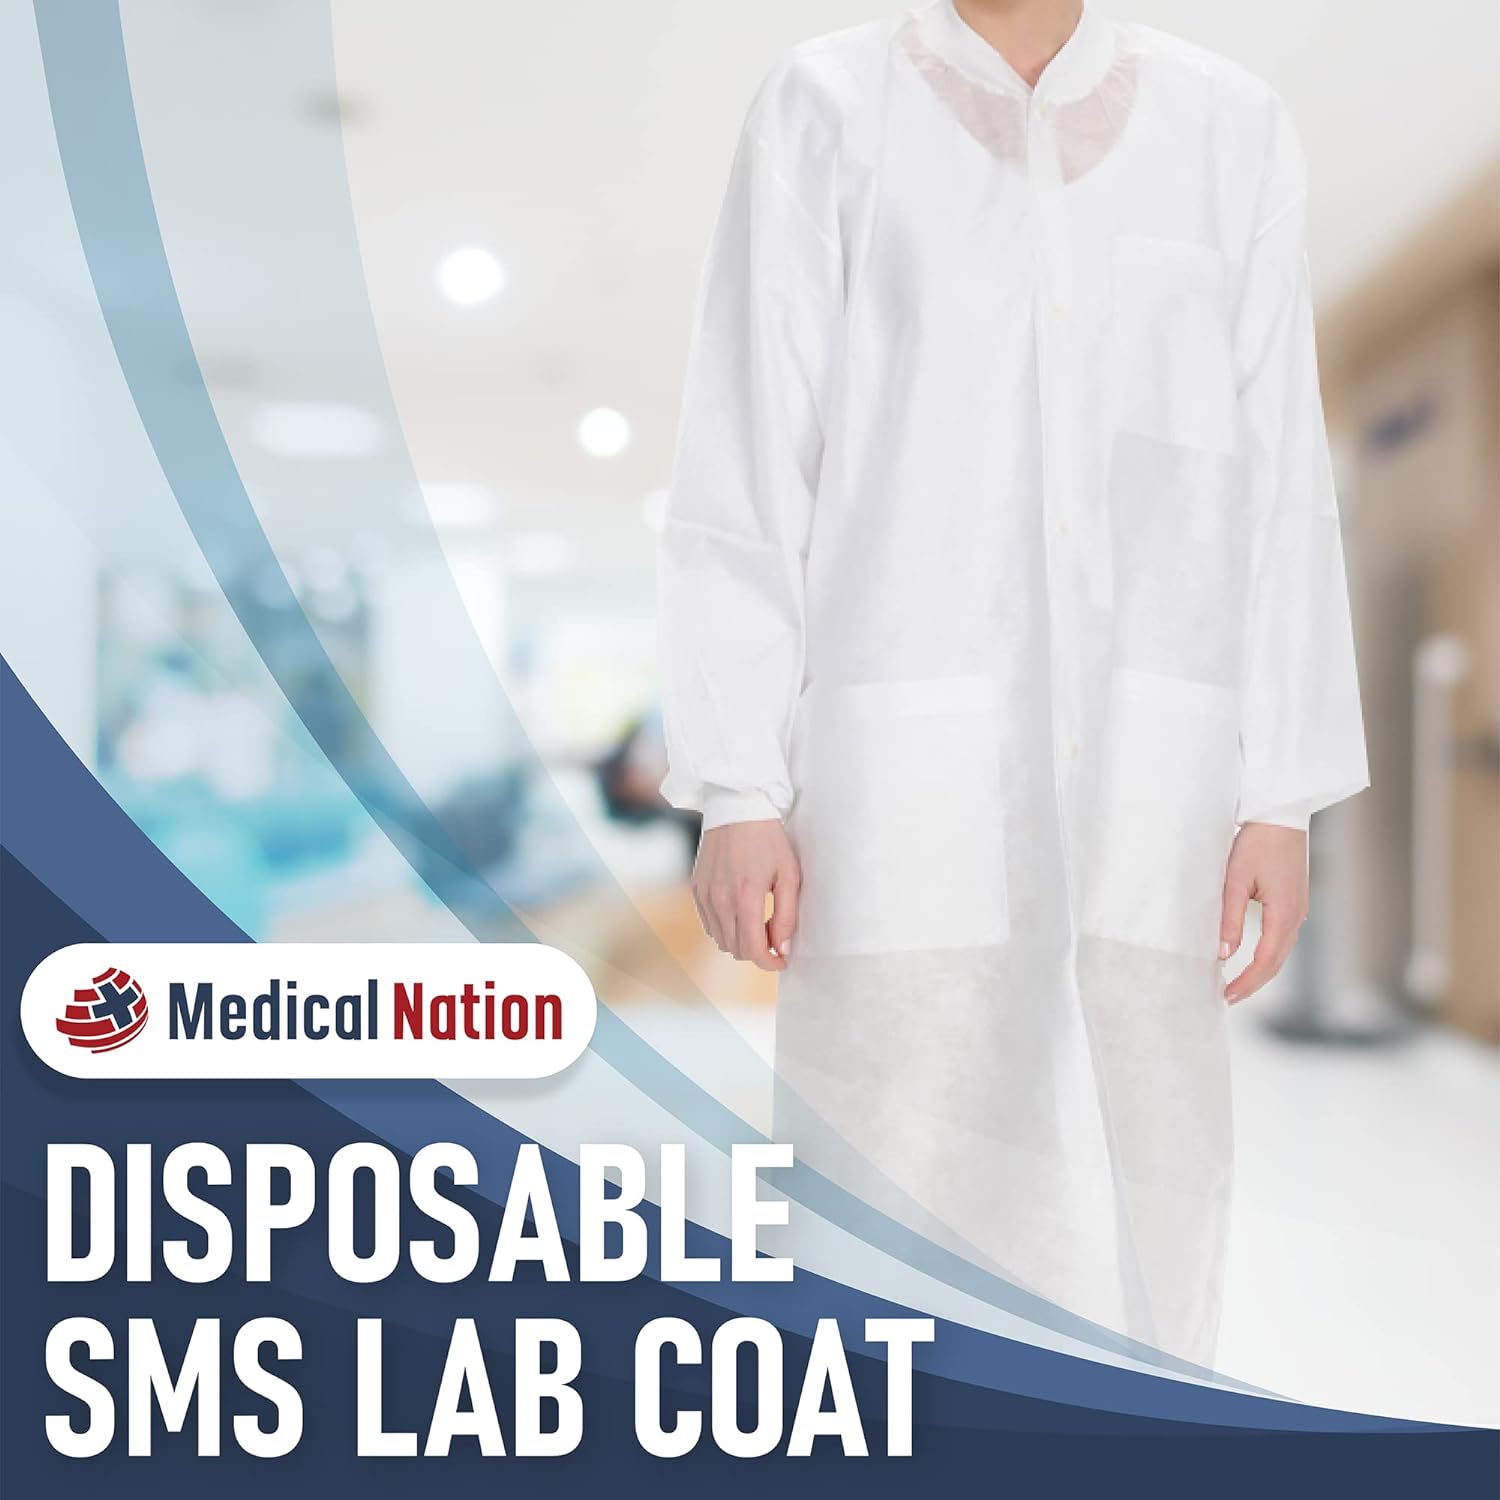 MEDICAL NATION 10 Disposable Lab Coats - White Lab Coat with Pockets, Knee Length, Lab Coat Women and Men | Perfect For Use in